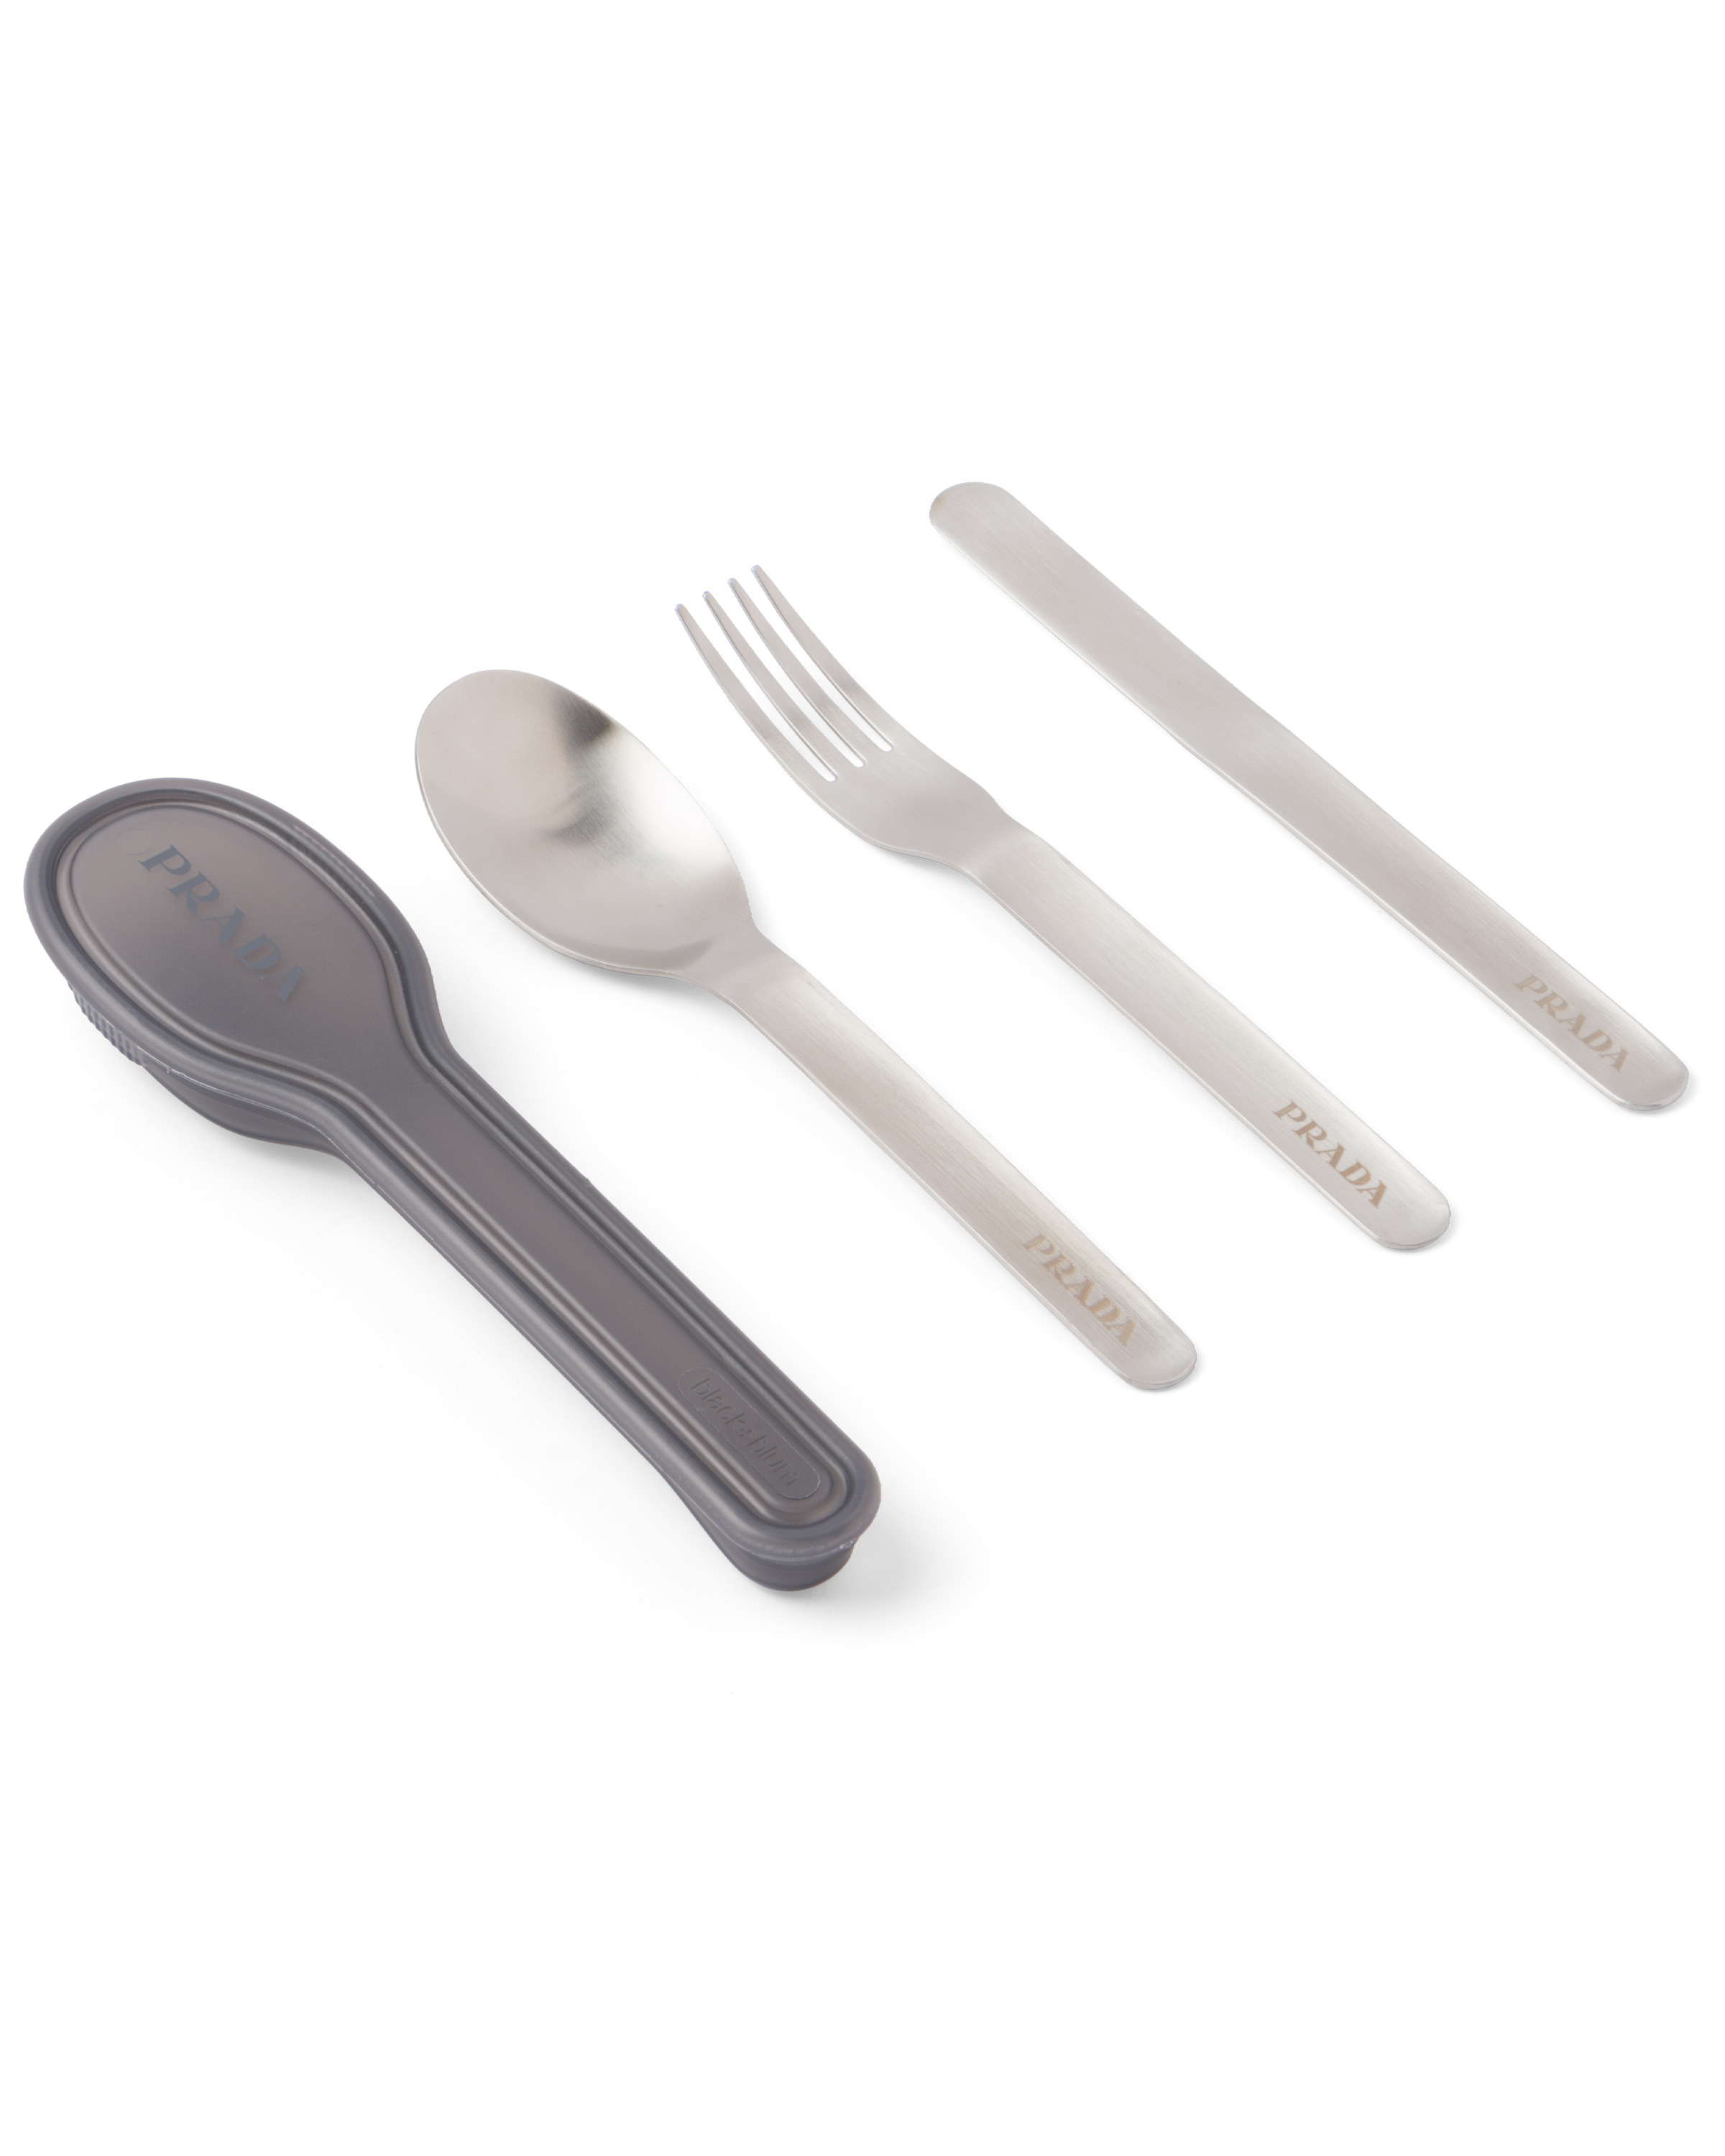 Stainless steel cutlery set - 2